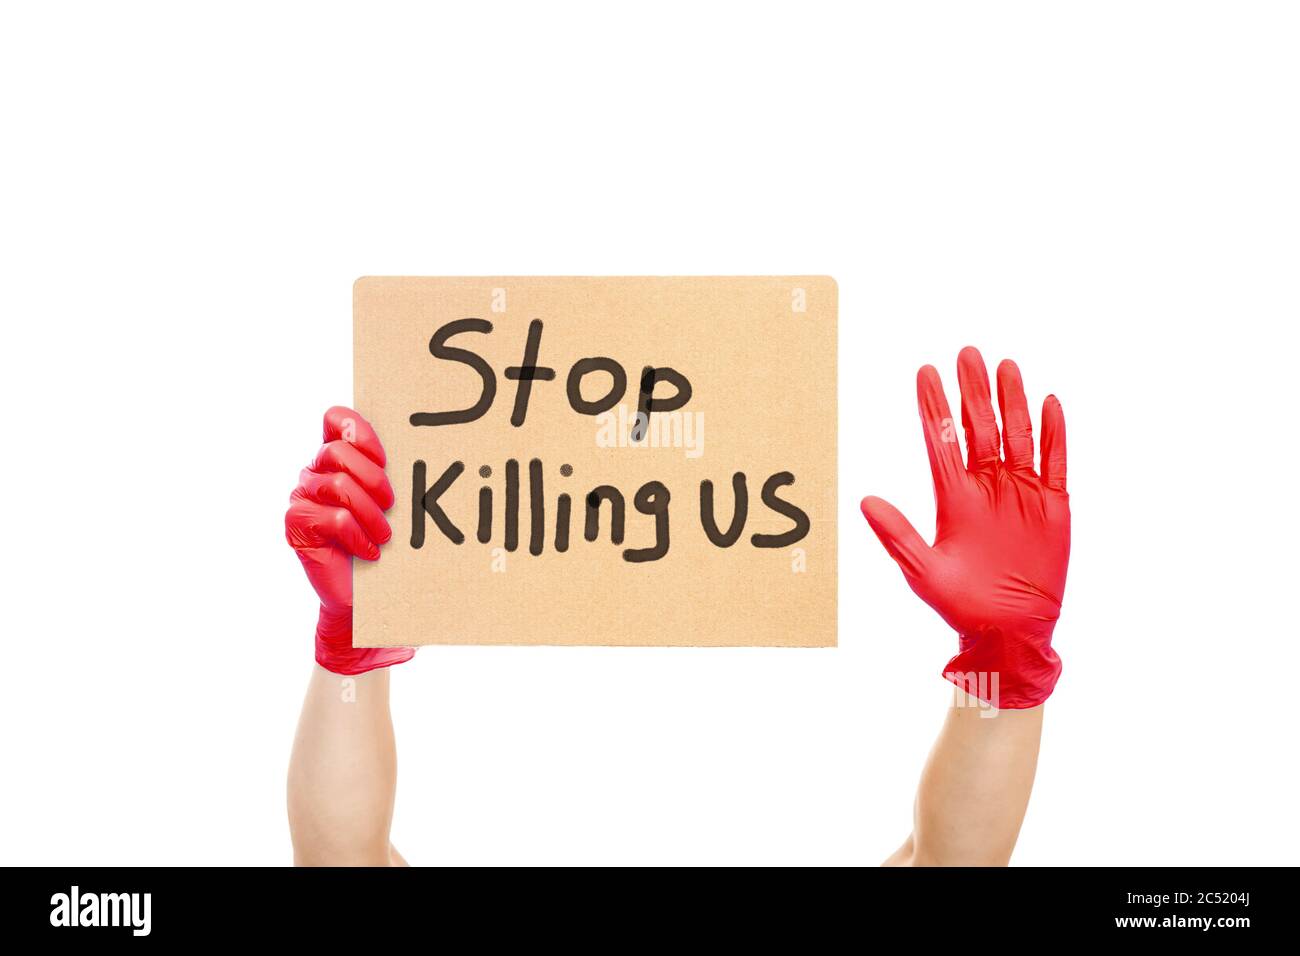 hands in red gloves are holding a cardboard with the slogan Stop Killing Us and showing palm stop gesture, mockup protest on theme of police brutality Stock Photo